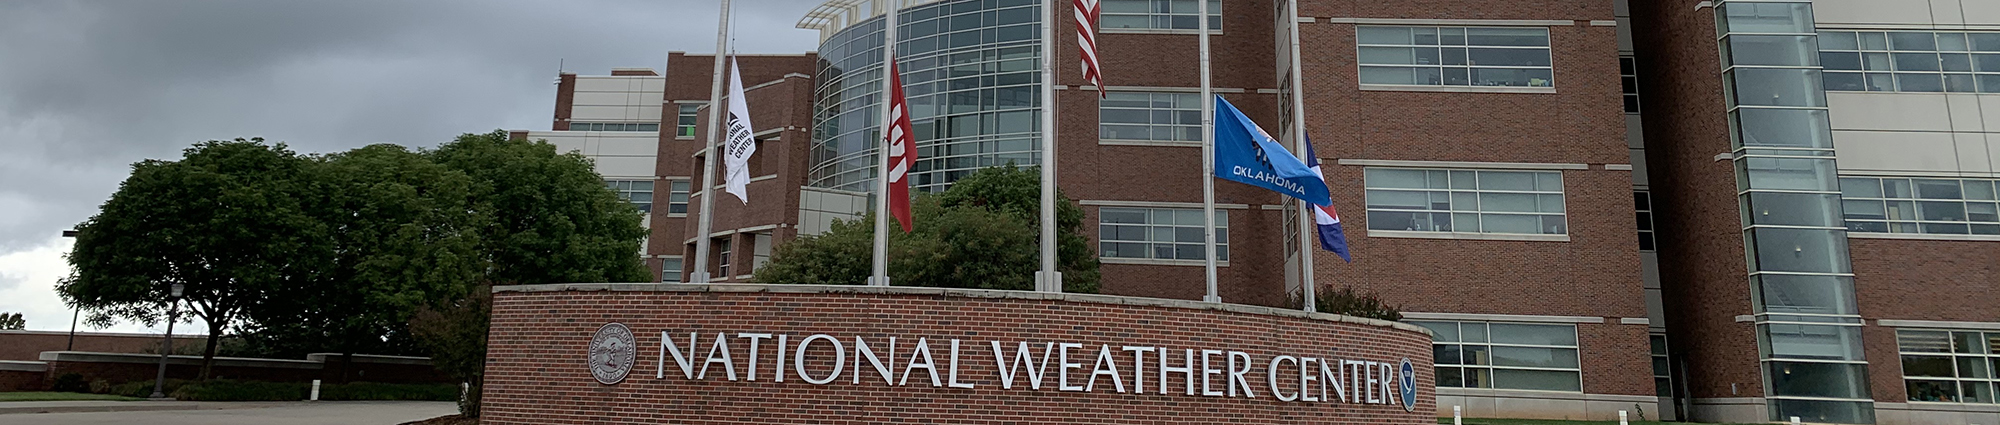 Welcome to the National Weather Center (NWC)